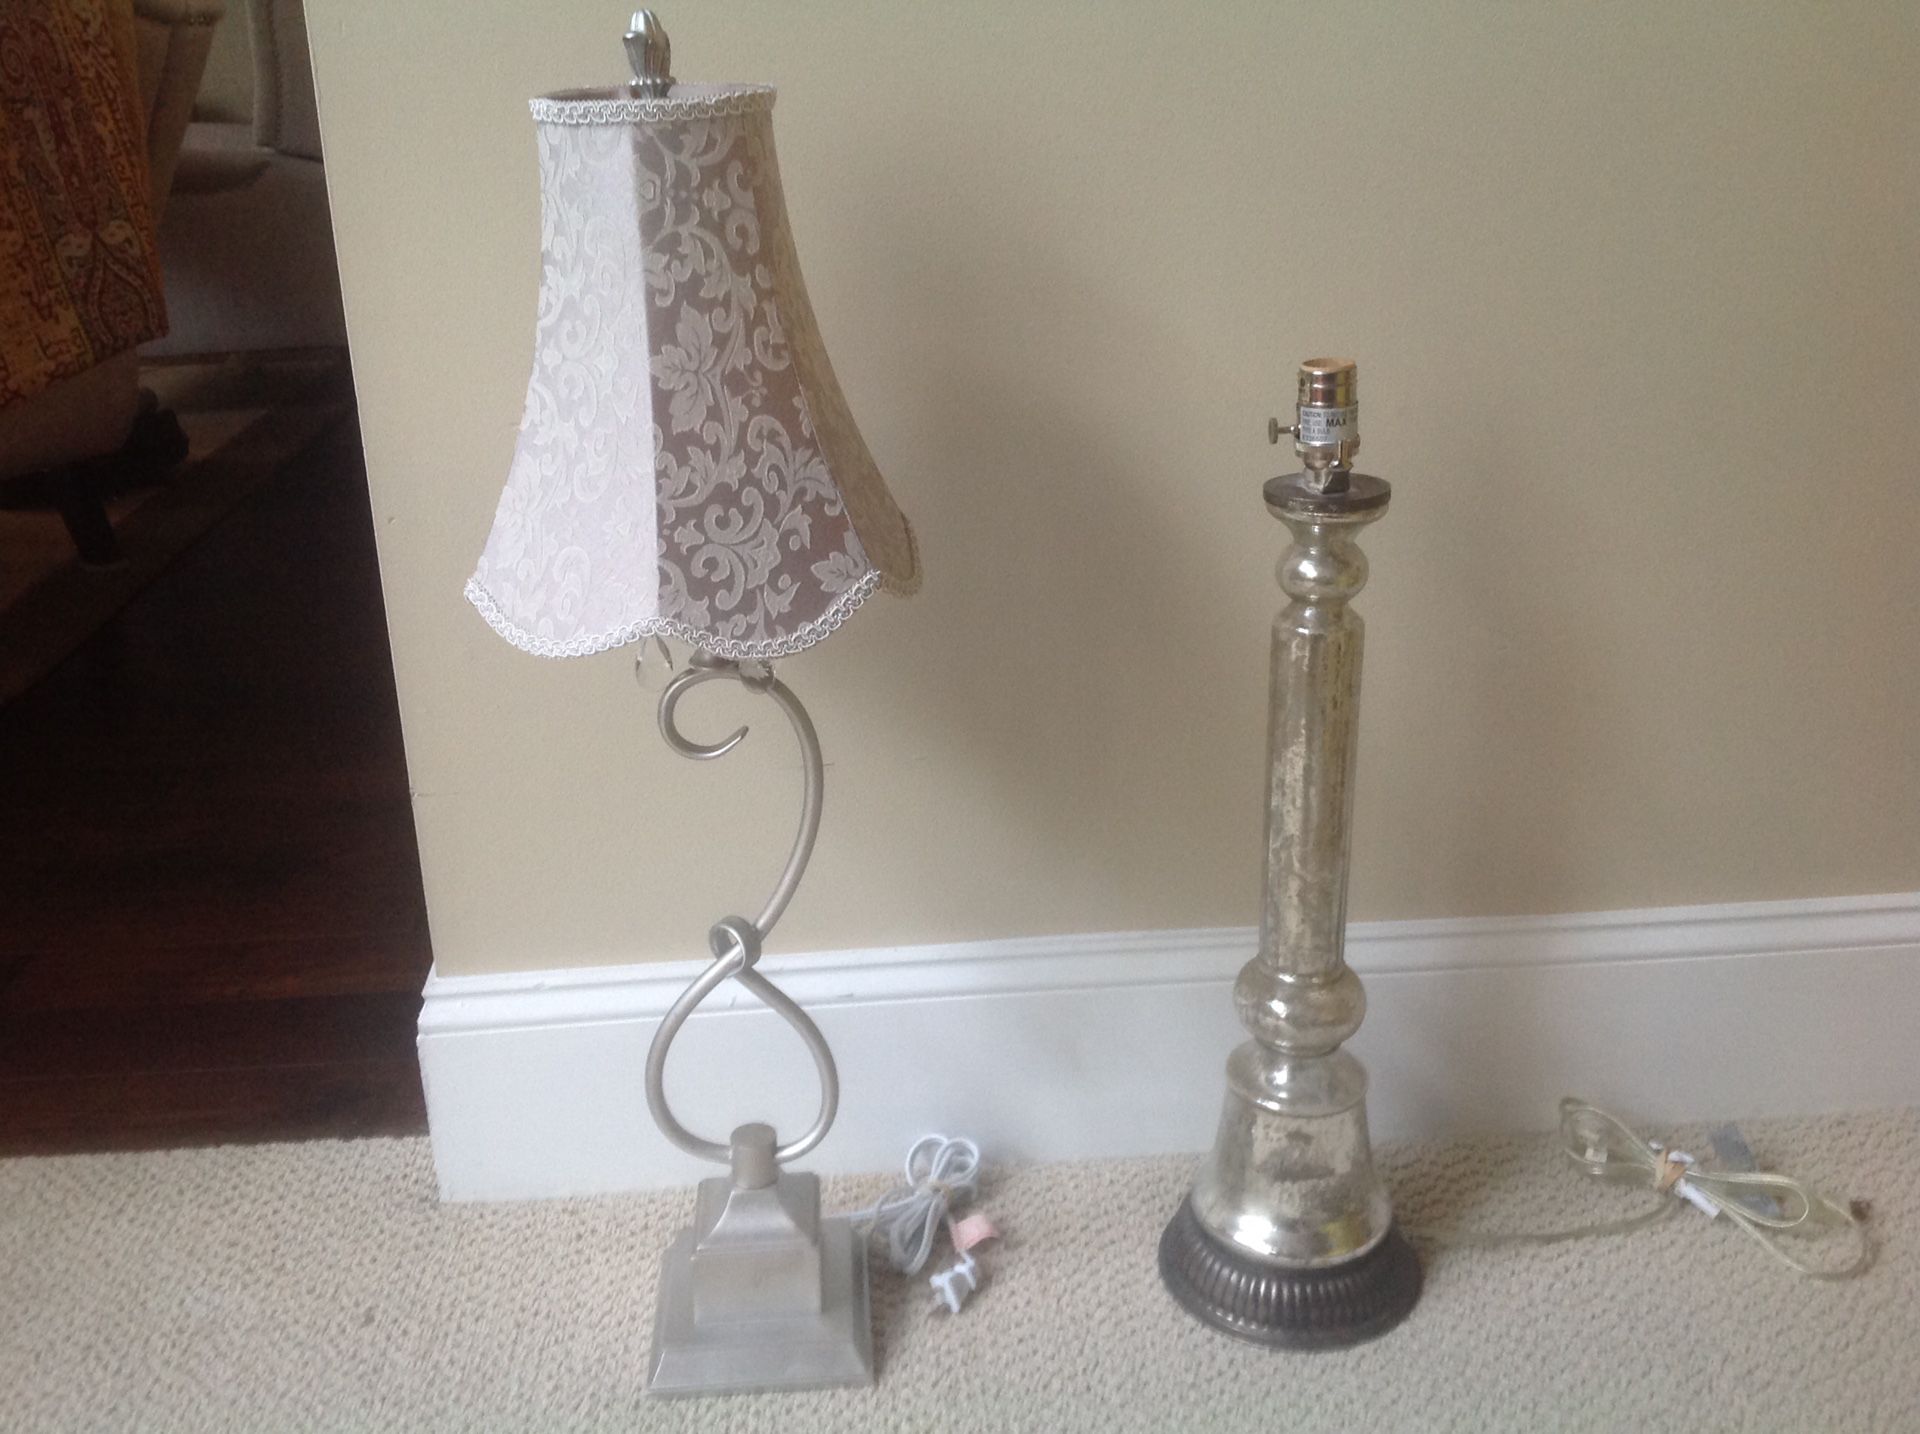 The prettiest lamps mercury glass one is pottery barn 35-45 each. Have other floor ones too